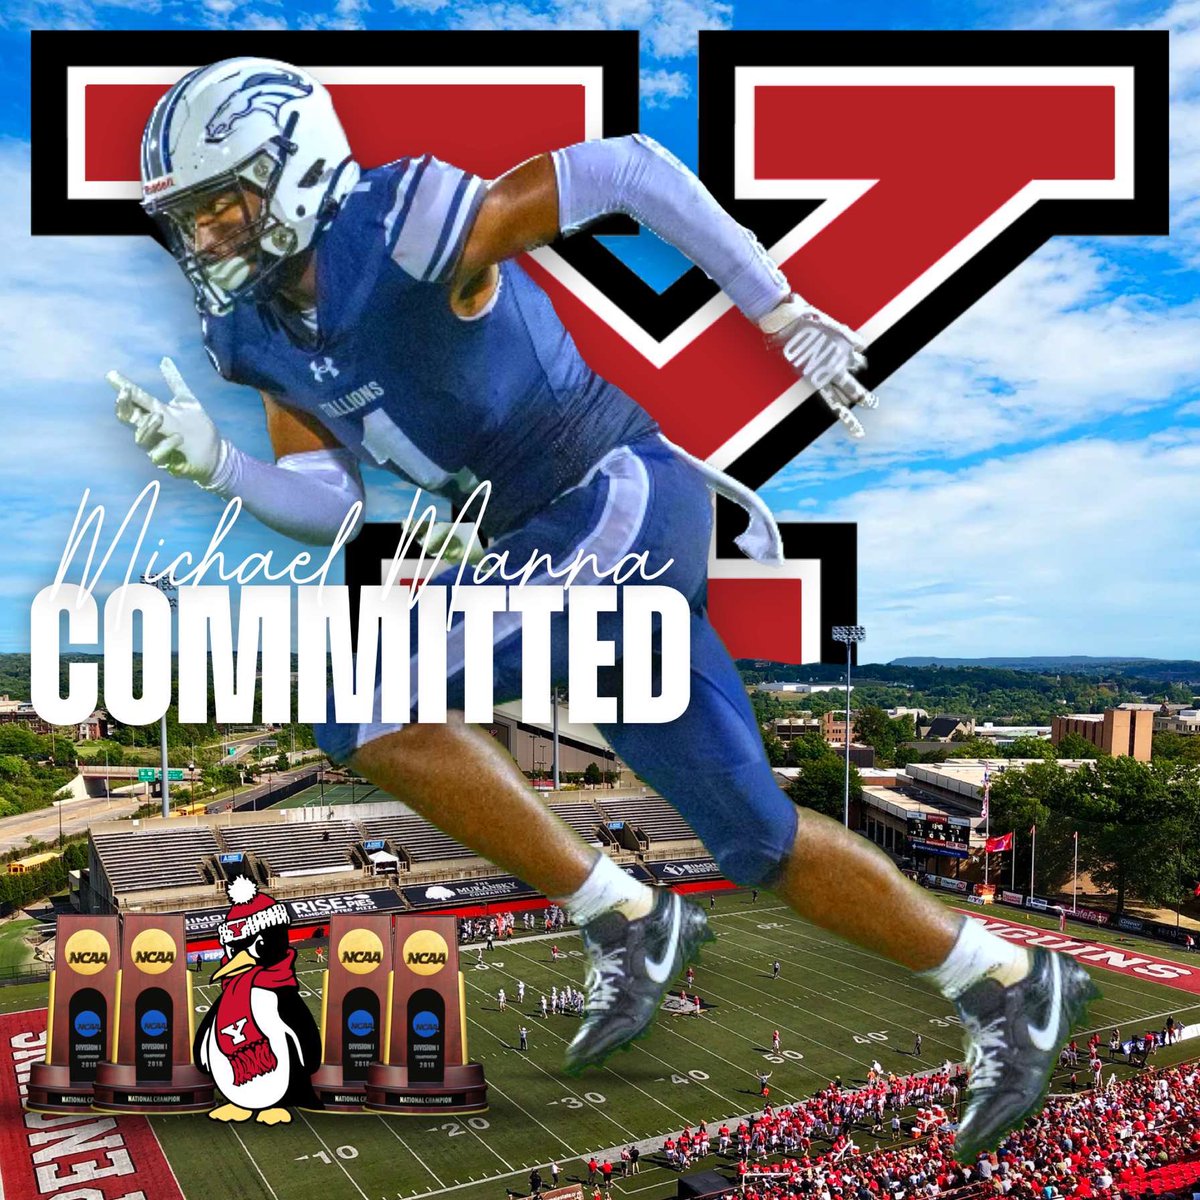 I’m very blessed to be able to announce my commitment to continue my academic career and play D1 Football at Youngstown State! I want to thank God, all of my coaches who have helped me and guided me through this process and @Coach_RGamble for believing in my talents! GOGUINS!🐧